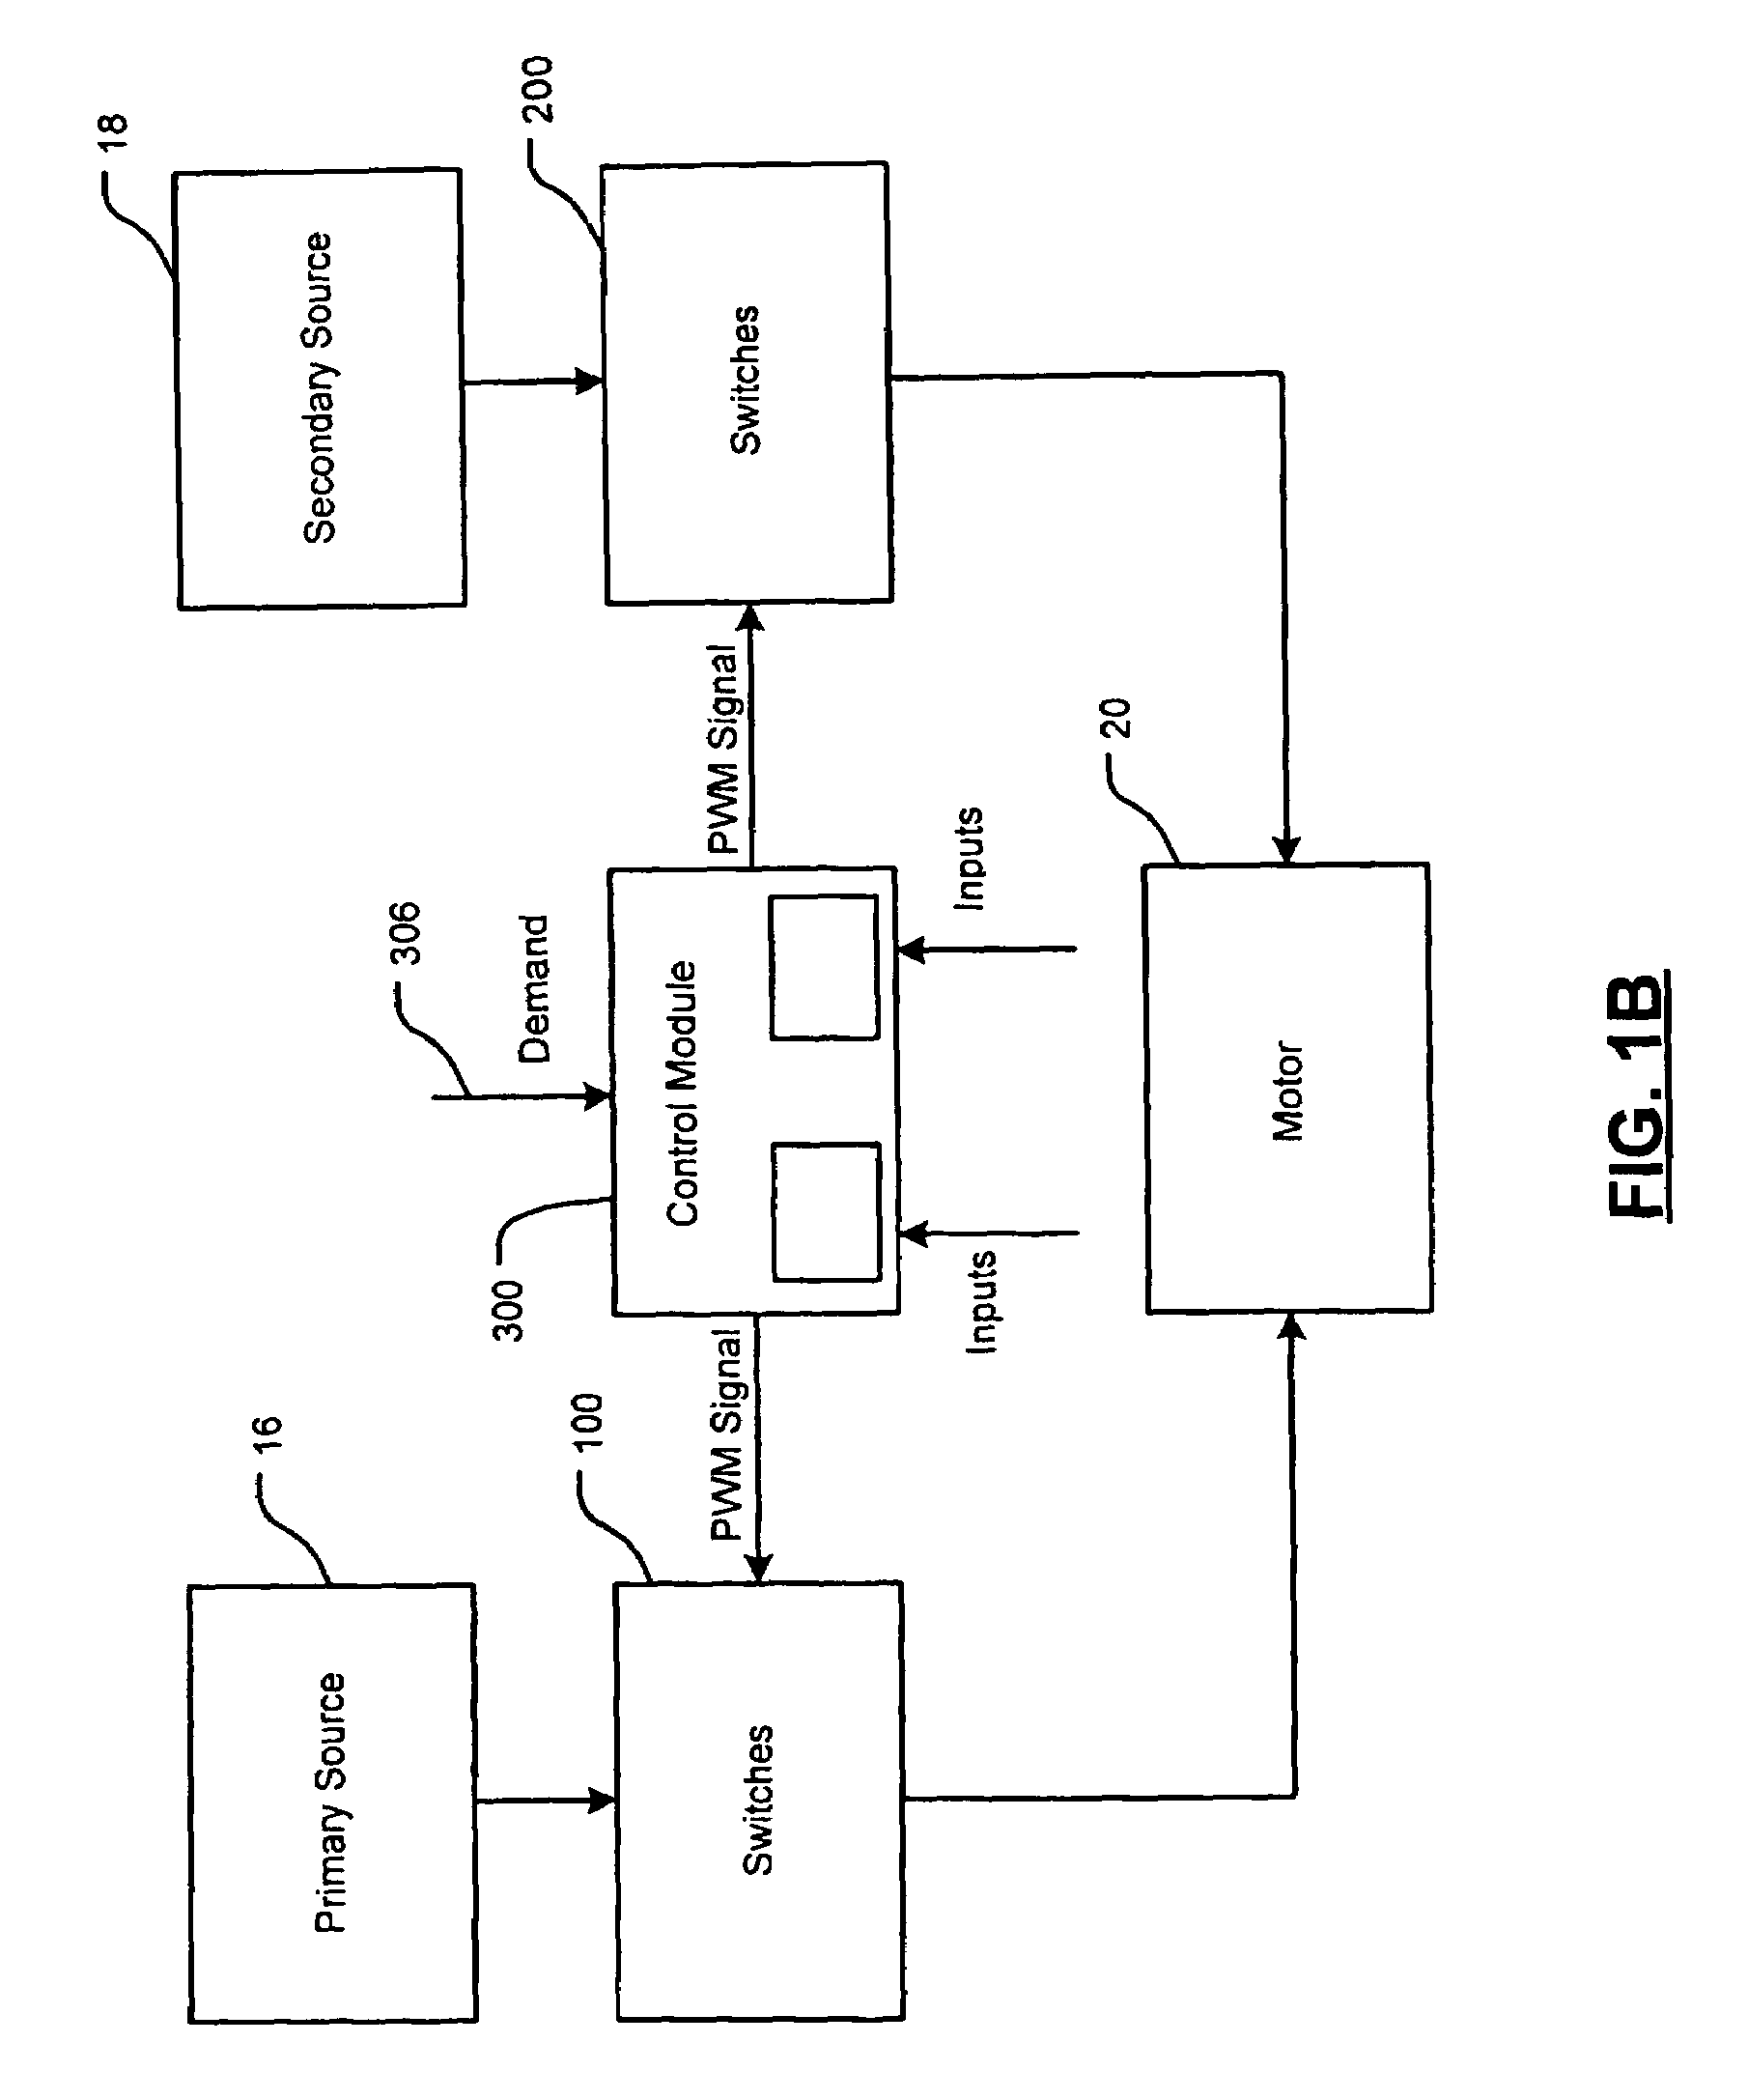 Doubled-ended inverter drive system topology for a hybrid vehicle